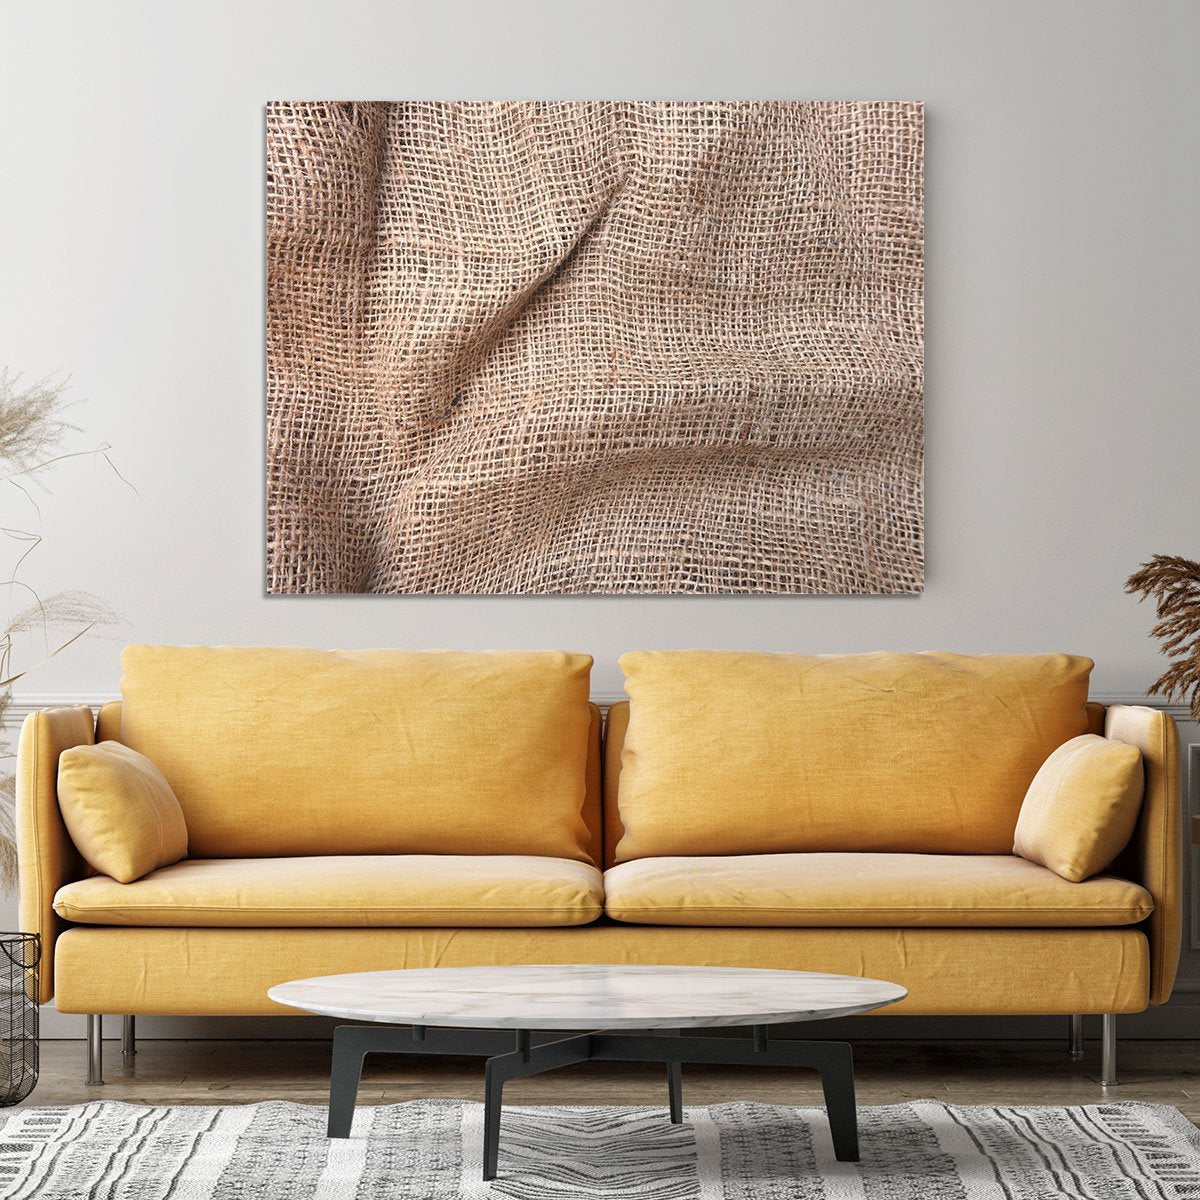 Sackcloth textured Canvas Print or Poster